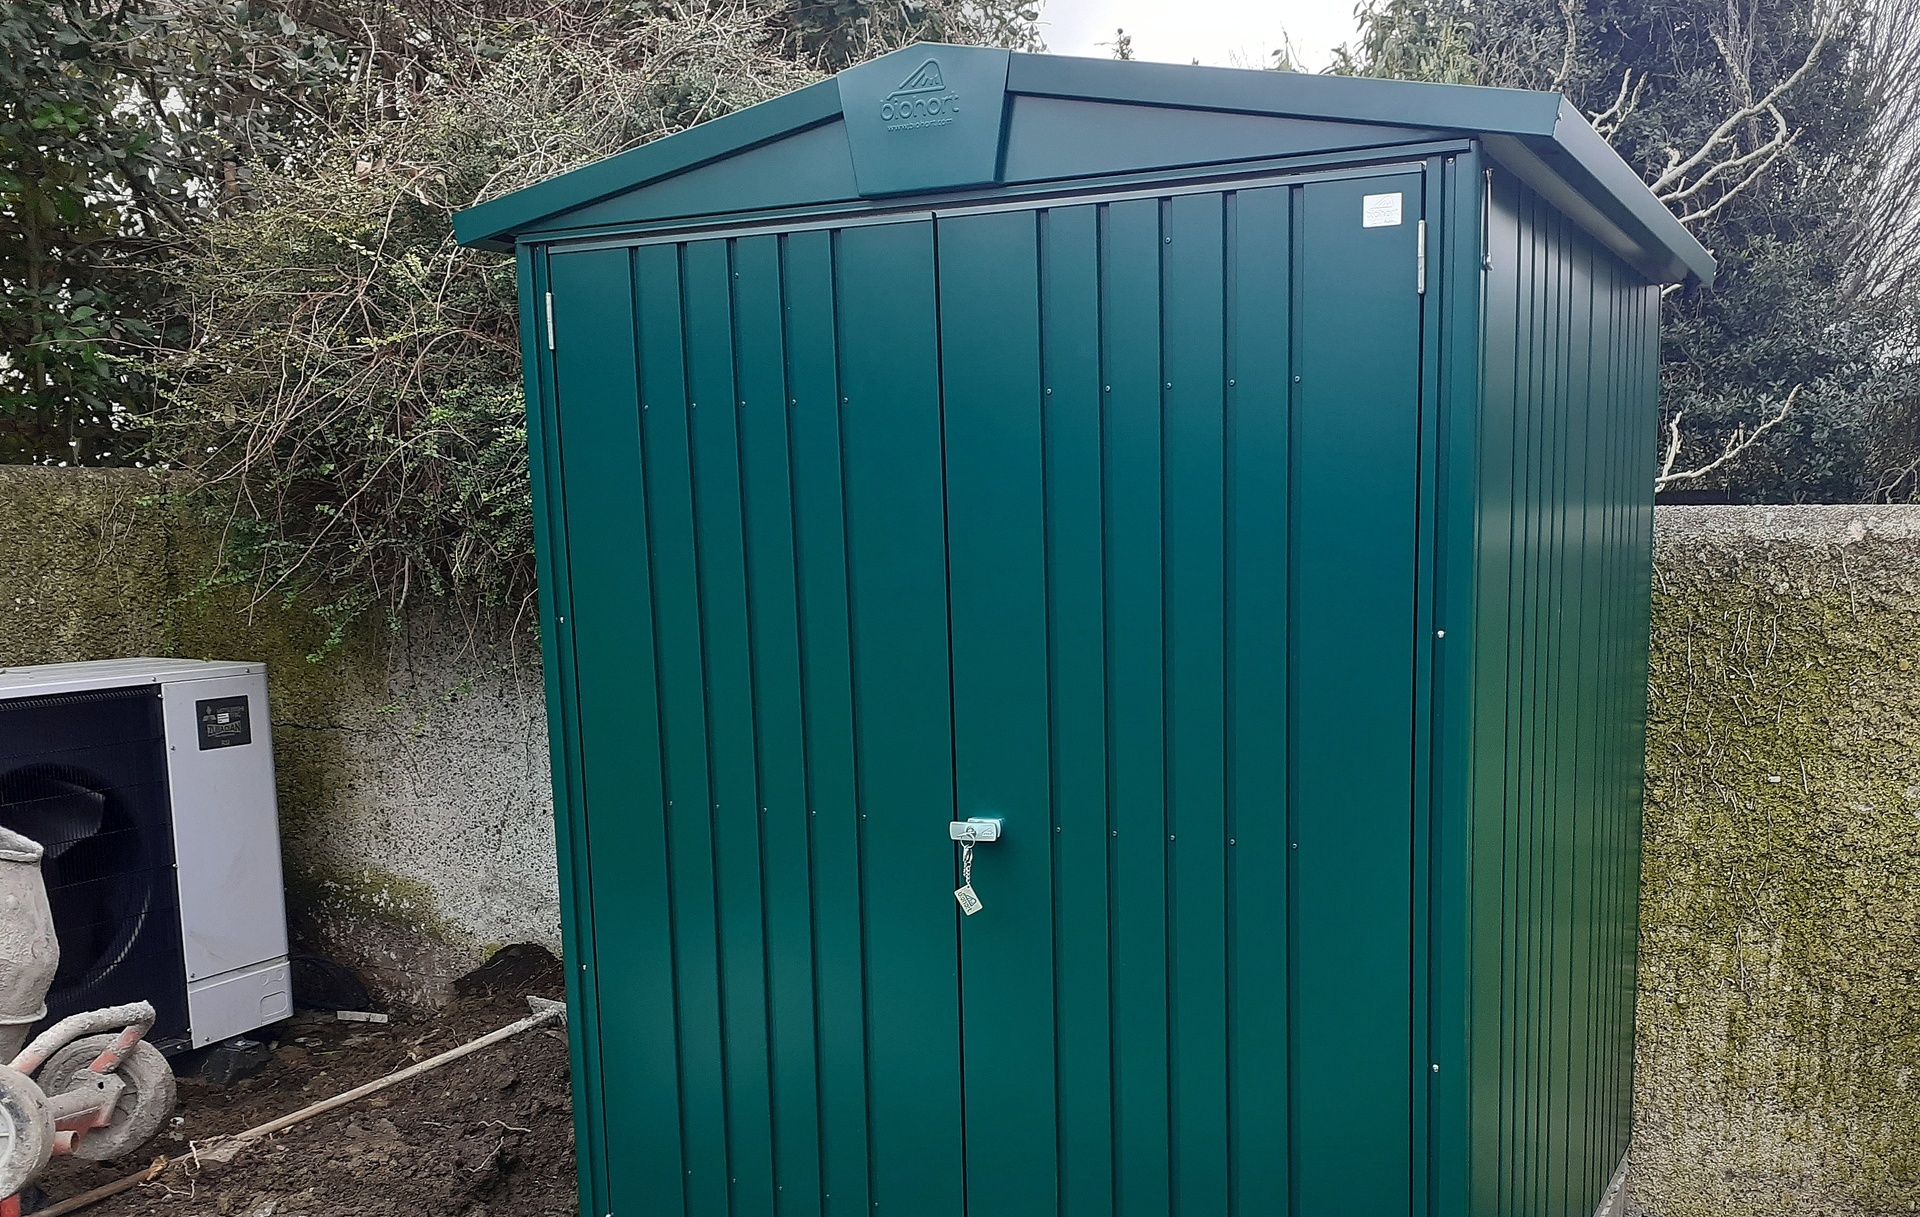 BEST PRICES for Biohort Europa Size 2 Garden Shed, in metallic dark green, supplied + fitted in Ranelagh, Dublin 6 by Owen Chubb Landscapers